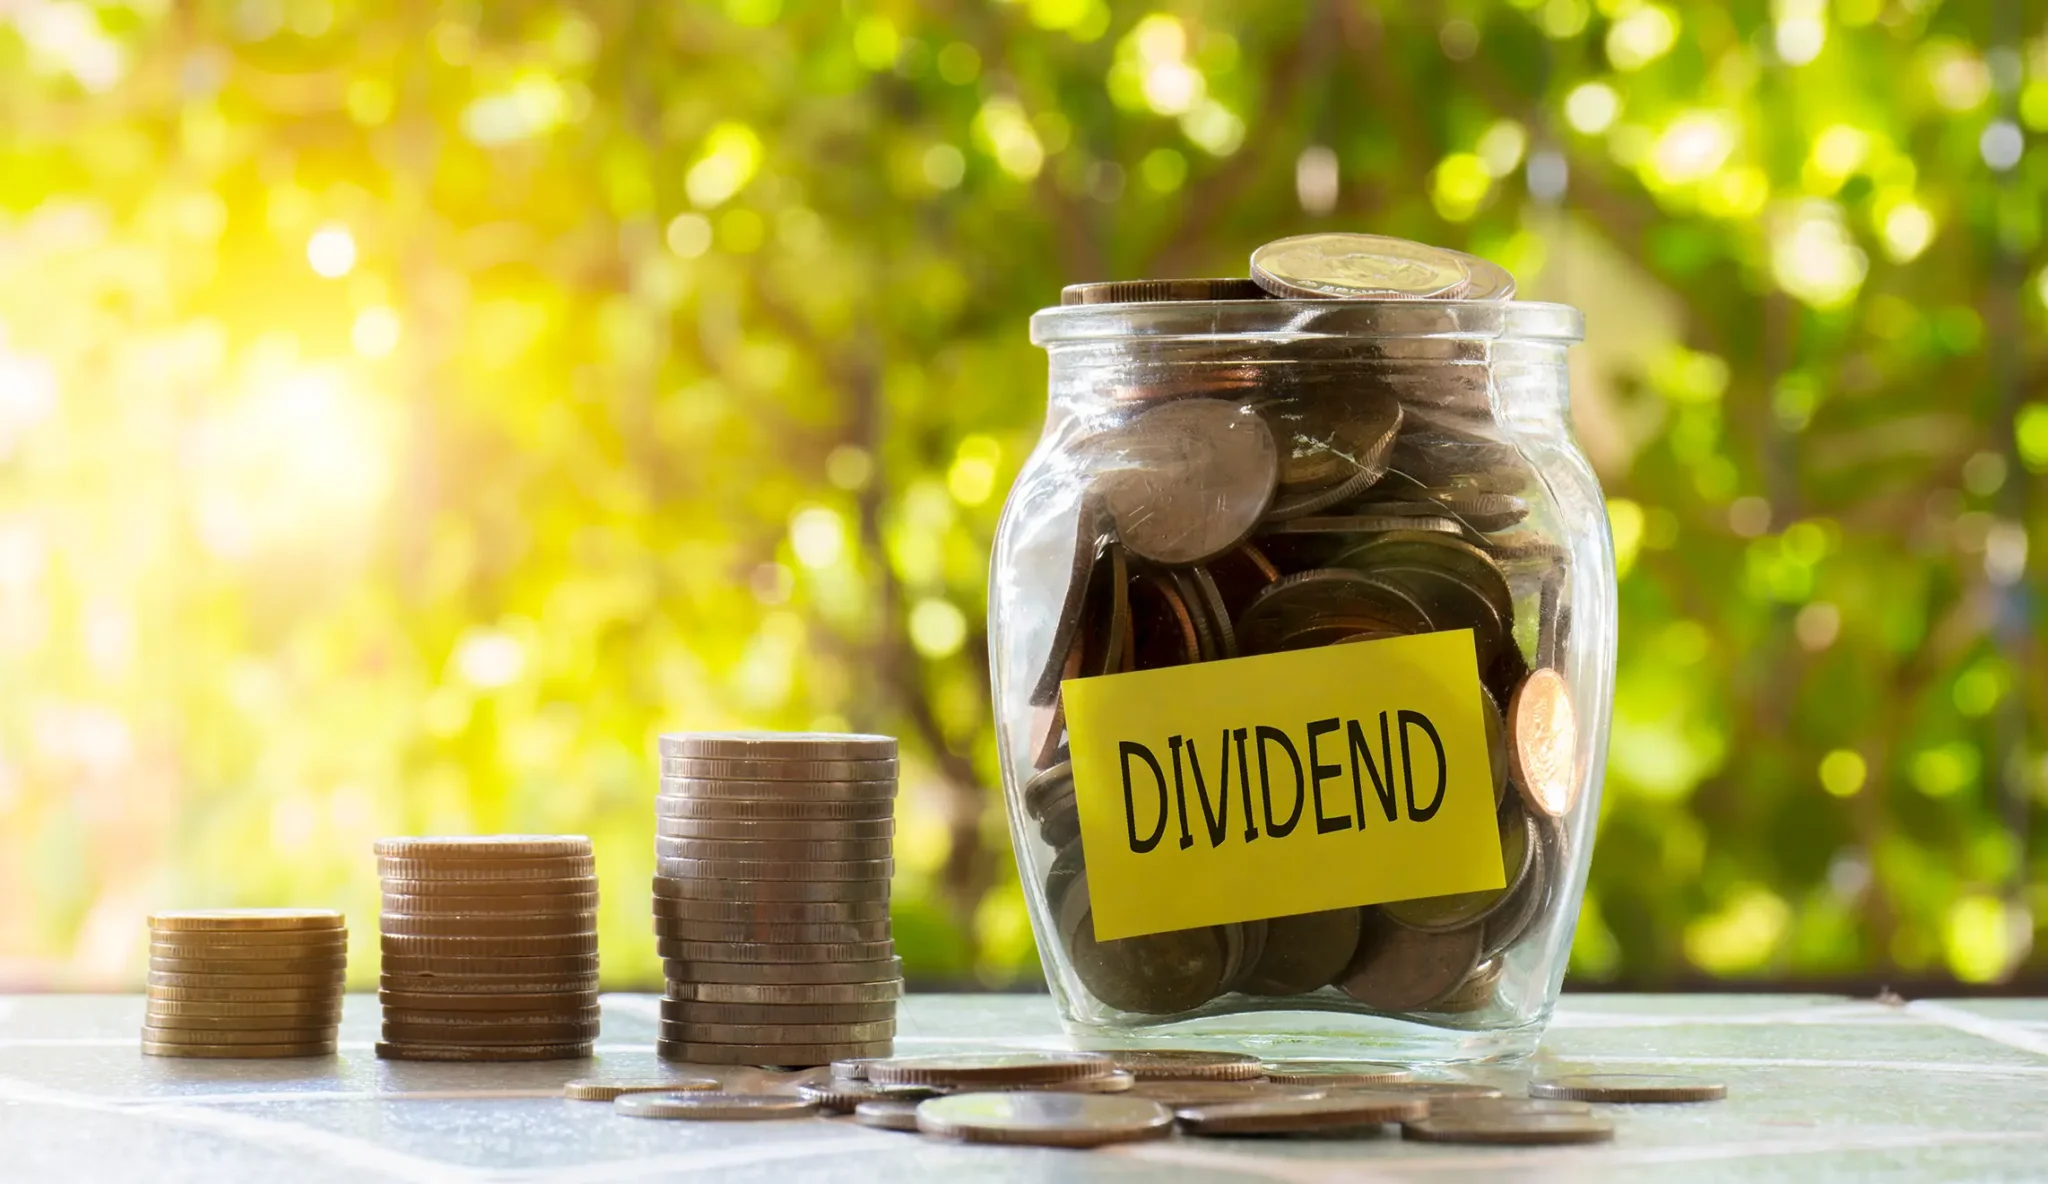 How do UK companies pay dividends to their shareholders?